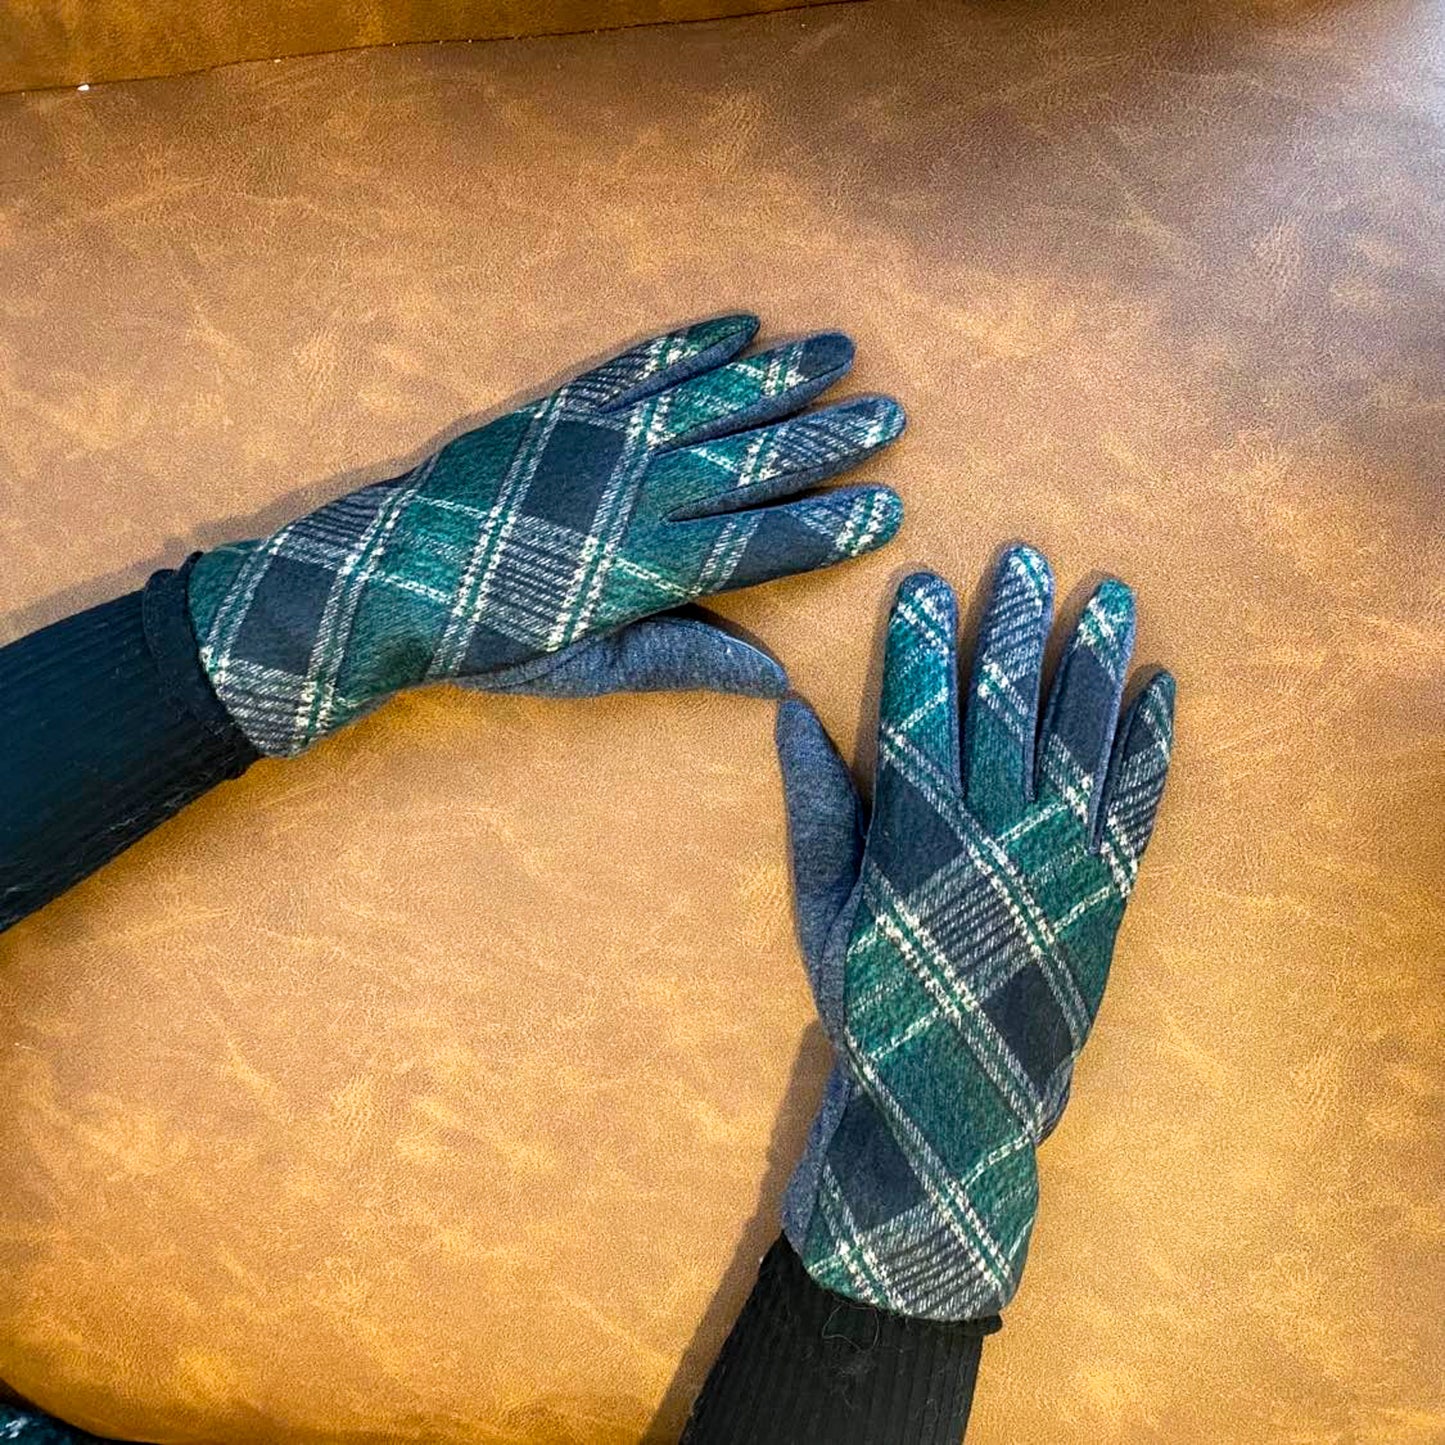 Plaid Touch Screen Texting Women Gloves